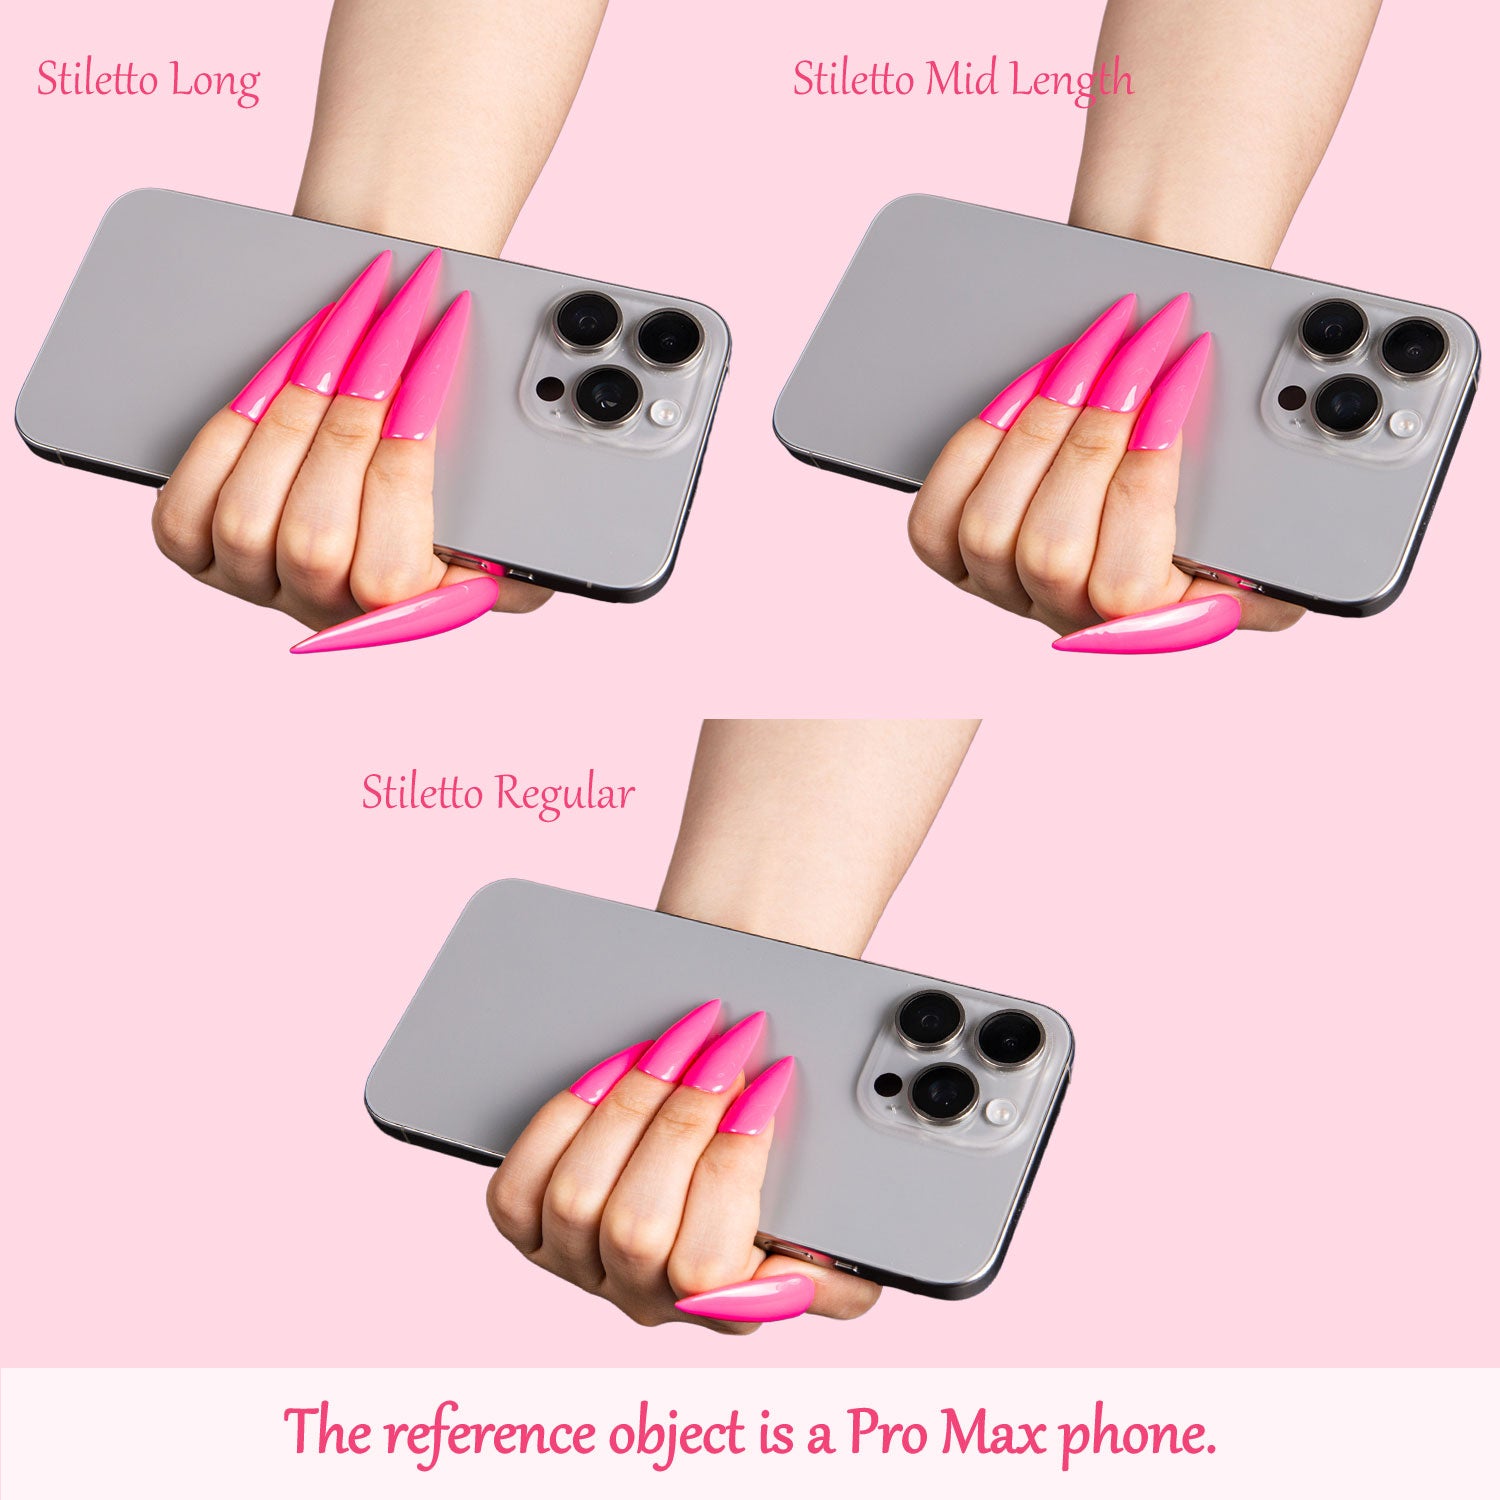 Comparison of pink stiletto press-on nails in long, mid-length, and regular lengths using a Pro Max phone as a reference object